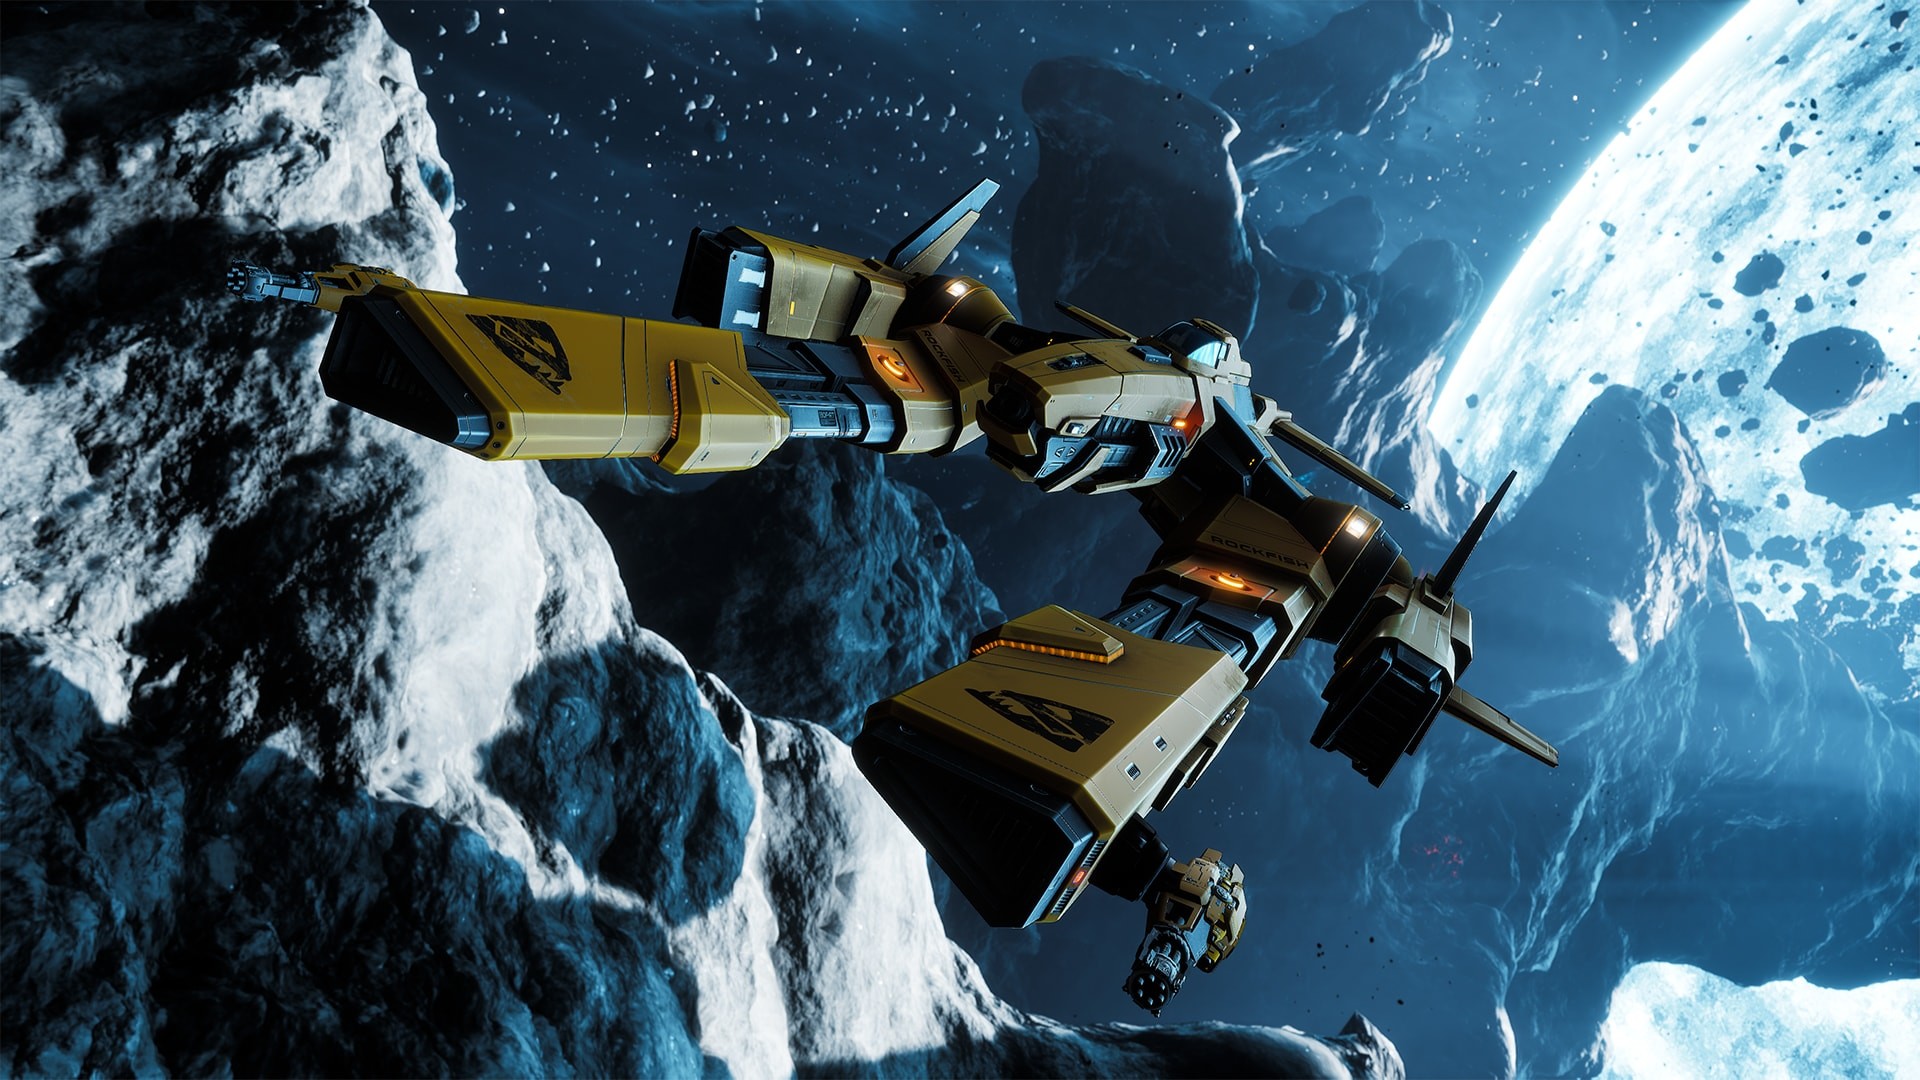 Everspace 2 Receives Stunning New Gameplay Videos